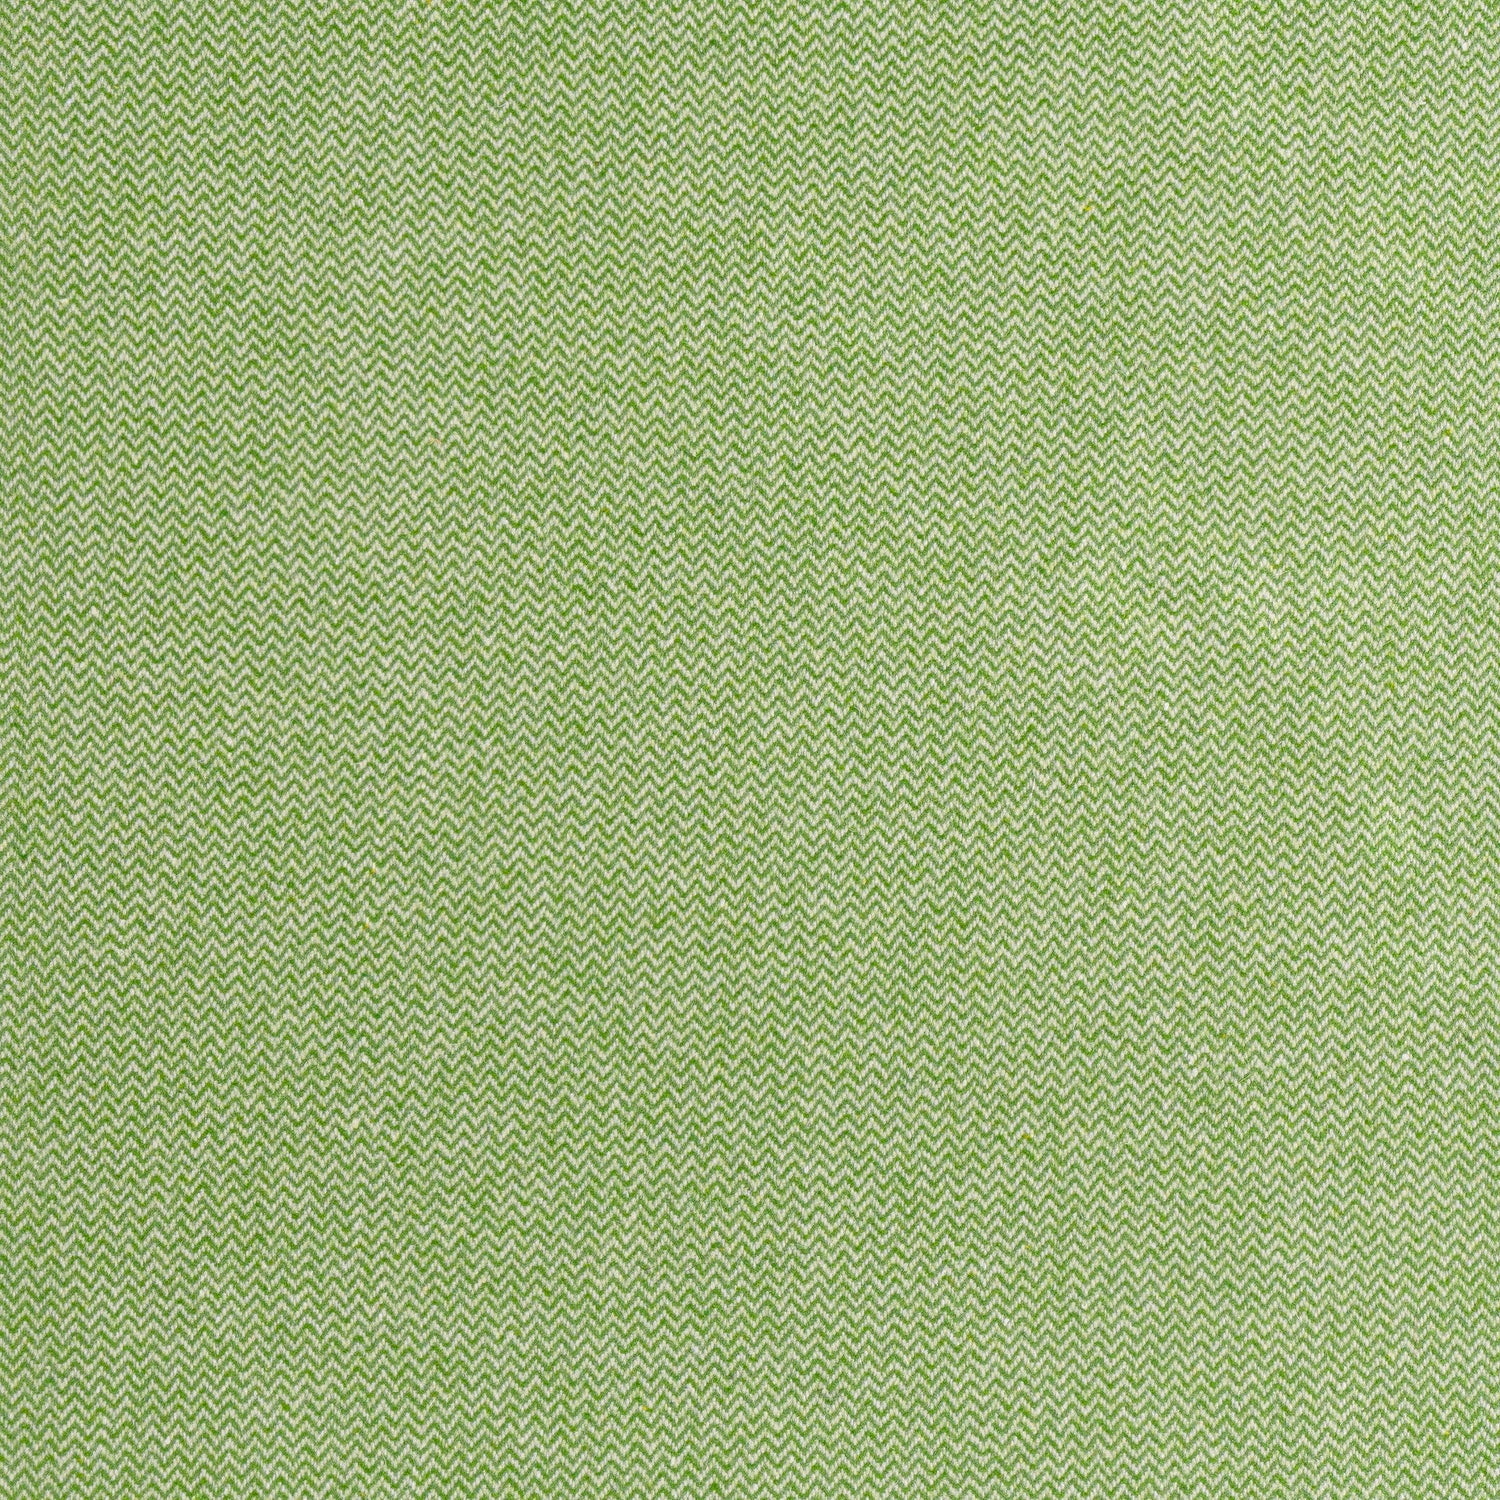 Dorset fabric in leaf color - pattern number W80906 - by Thibaut in the Dunmore collection